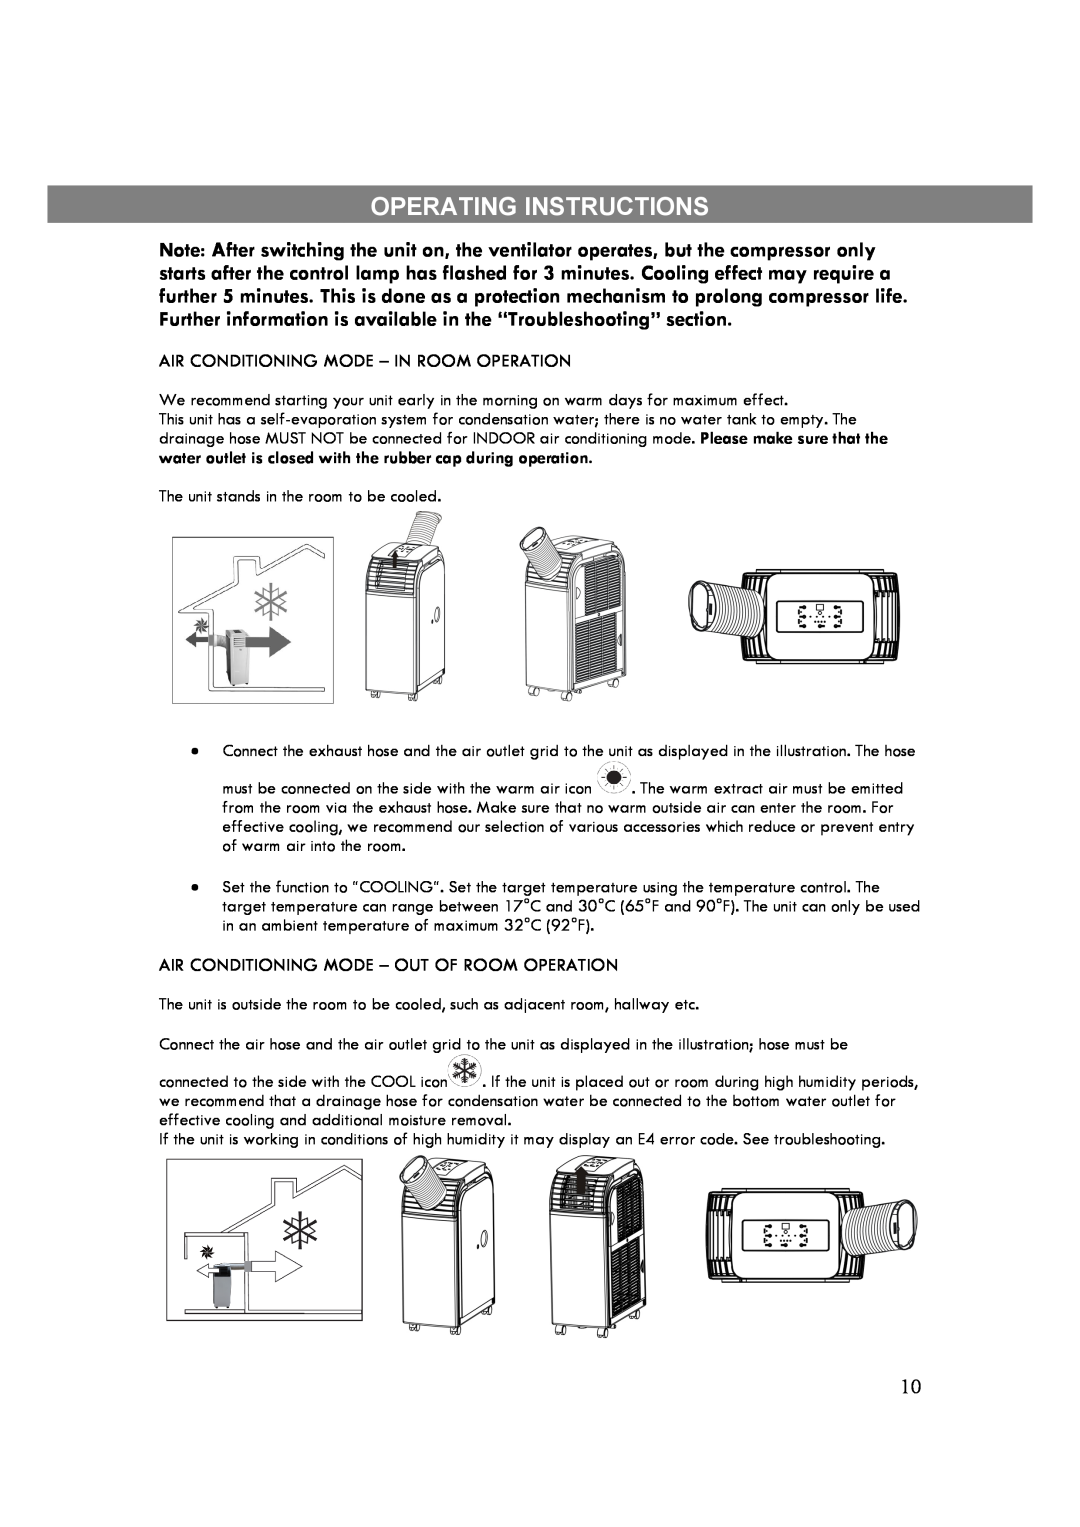 Kenmore 35132 manual Operating Instructions, Air Conditioning Mode - In Room Operation 